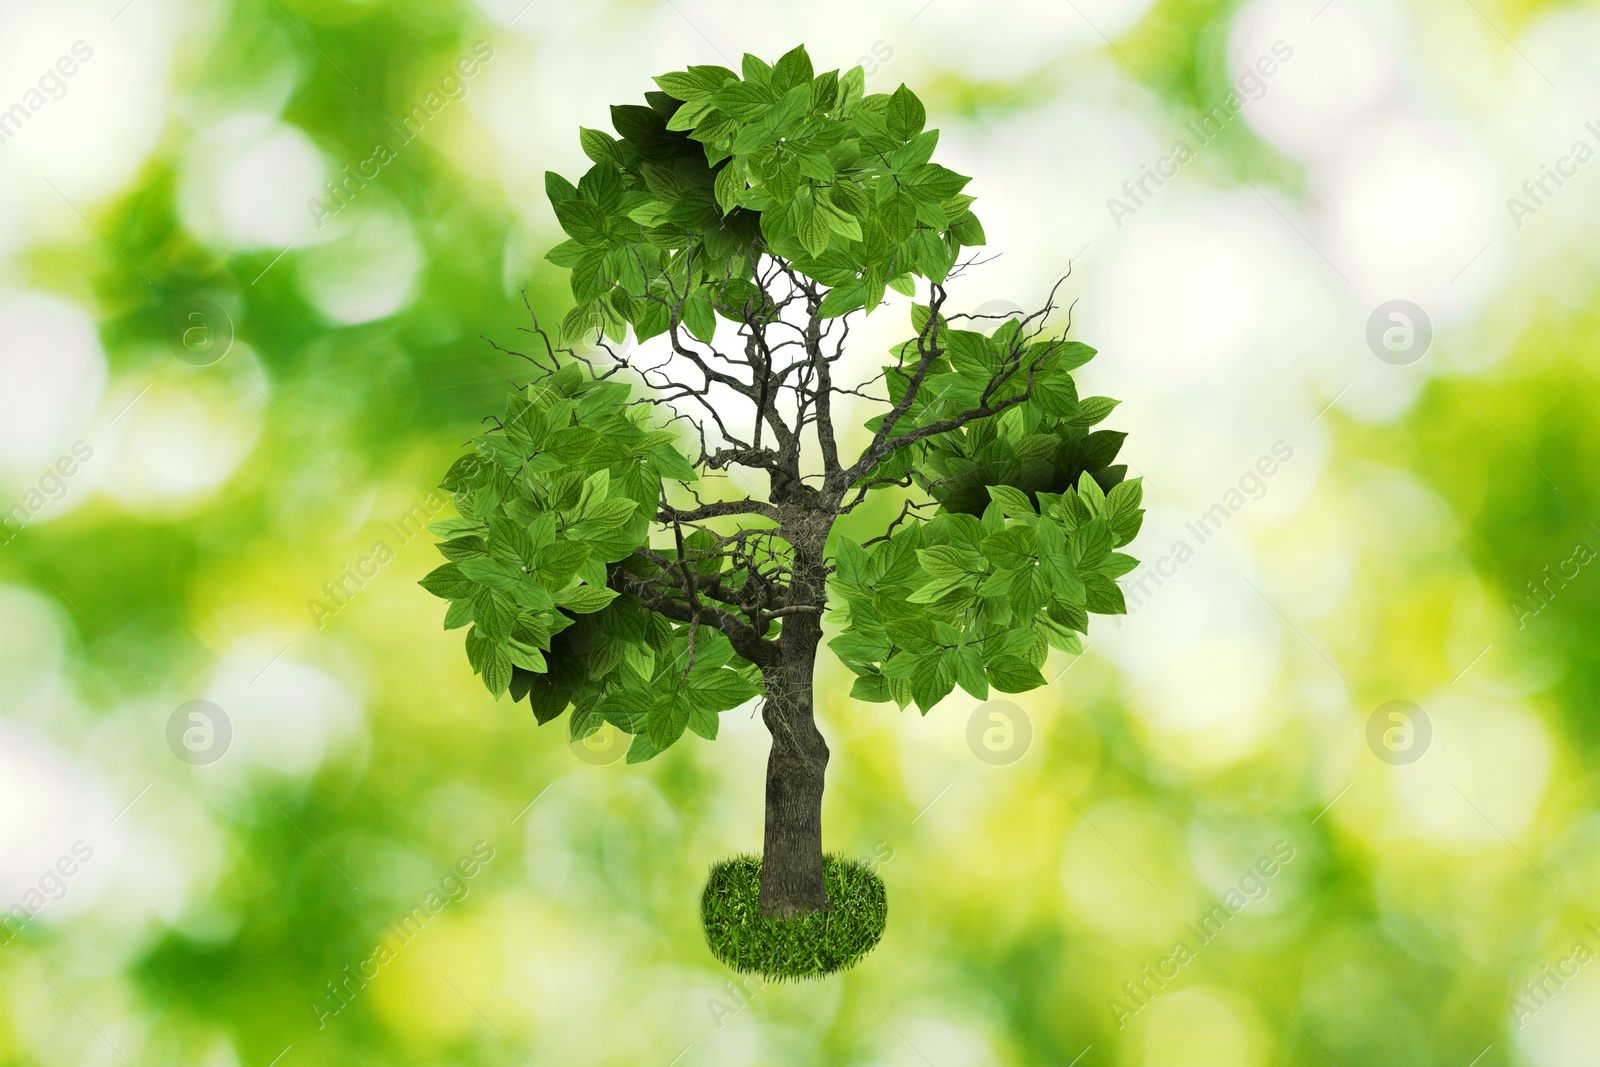 Image of Tree with green leaves in shape of recycling symbol on blurred background. Bokeh effect